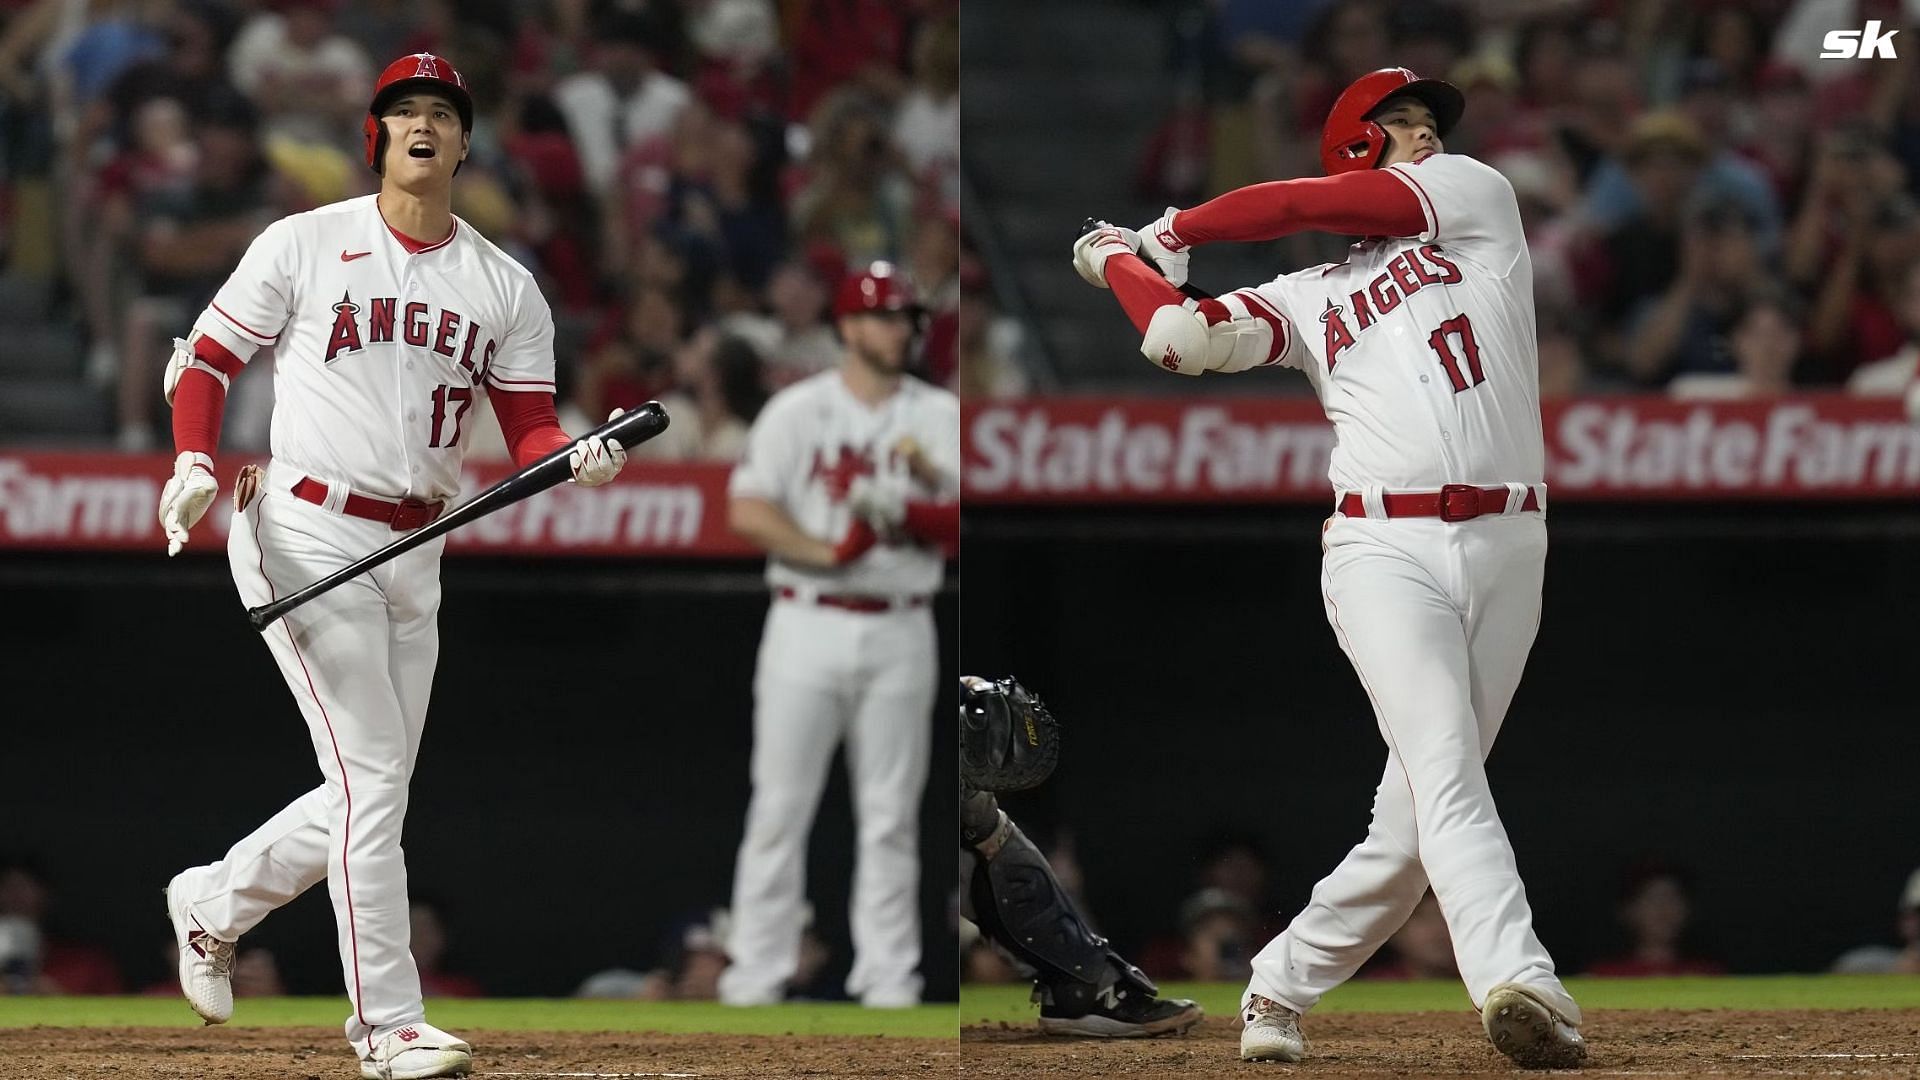 Shohei Ohtani struck out in the ninth innings with two runners on base for the Los Angeles Angels.